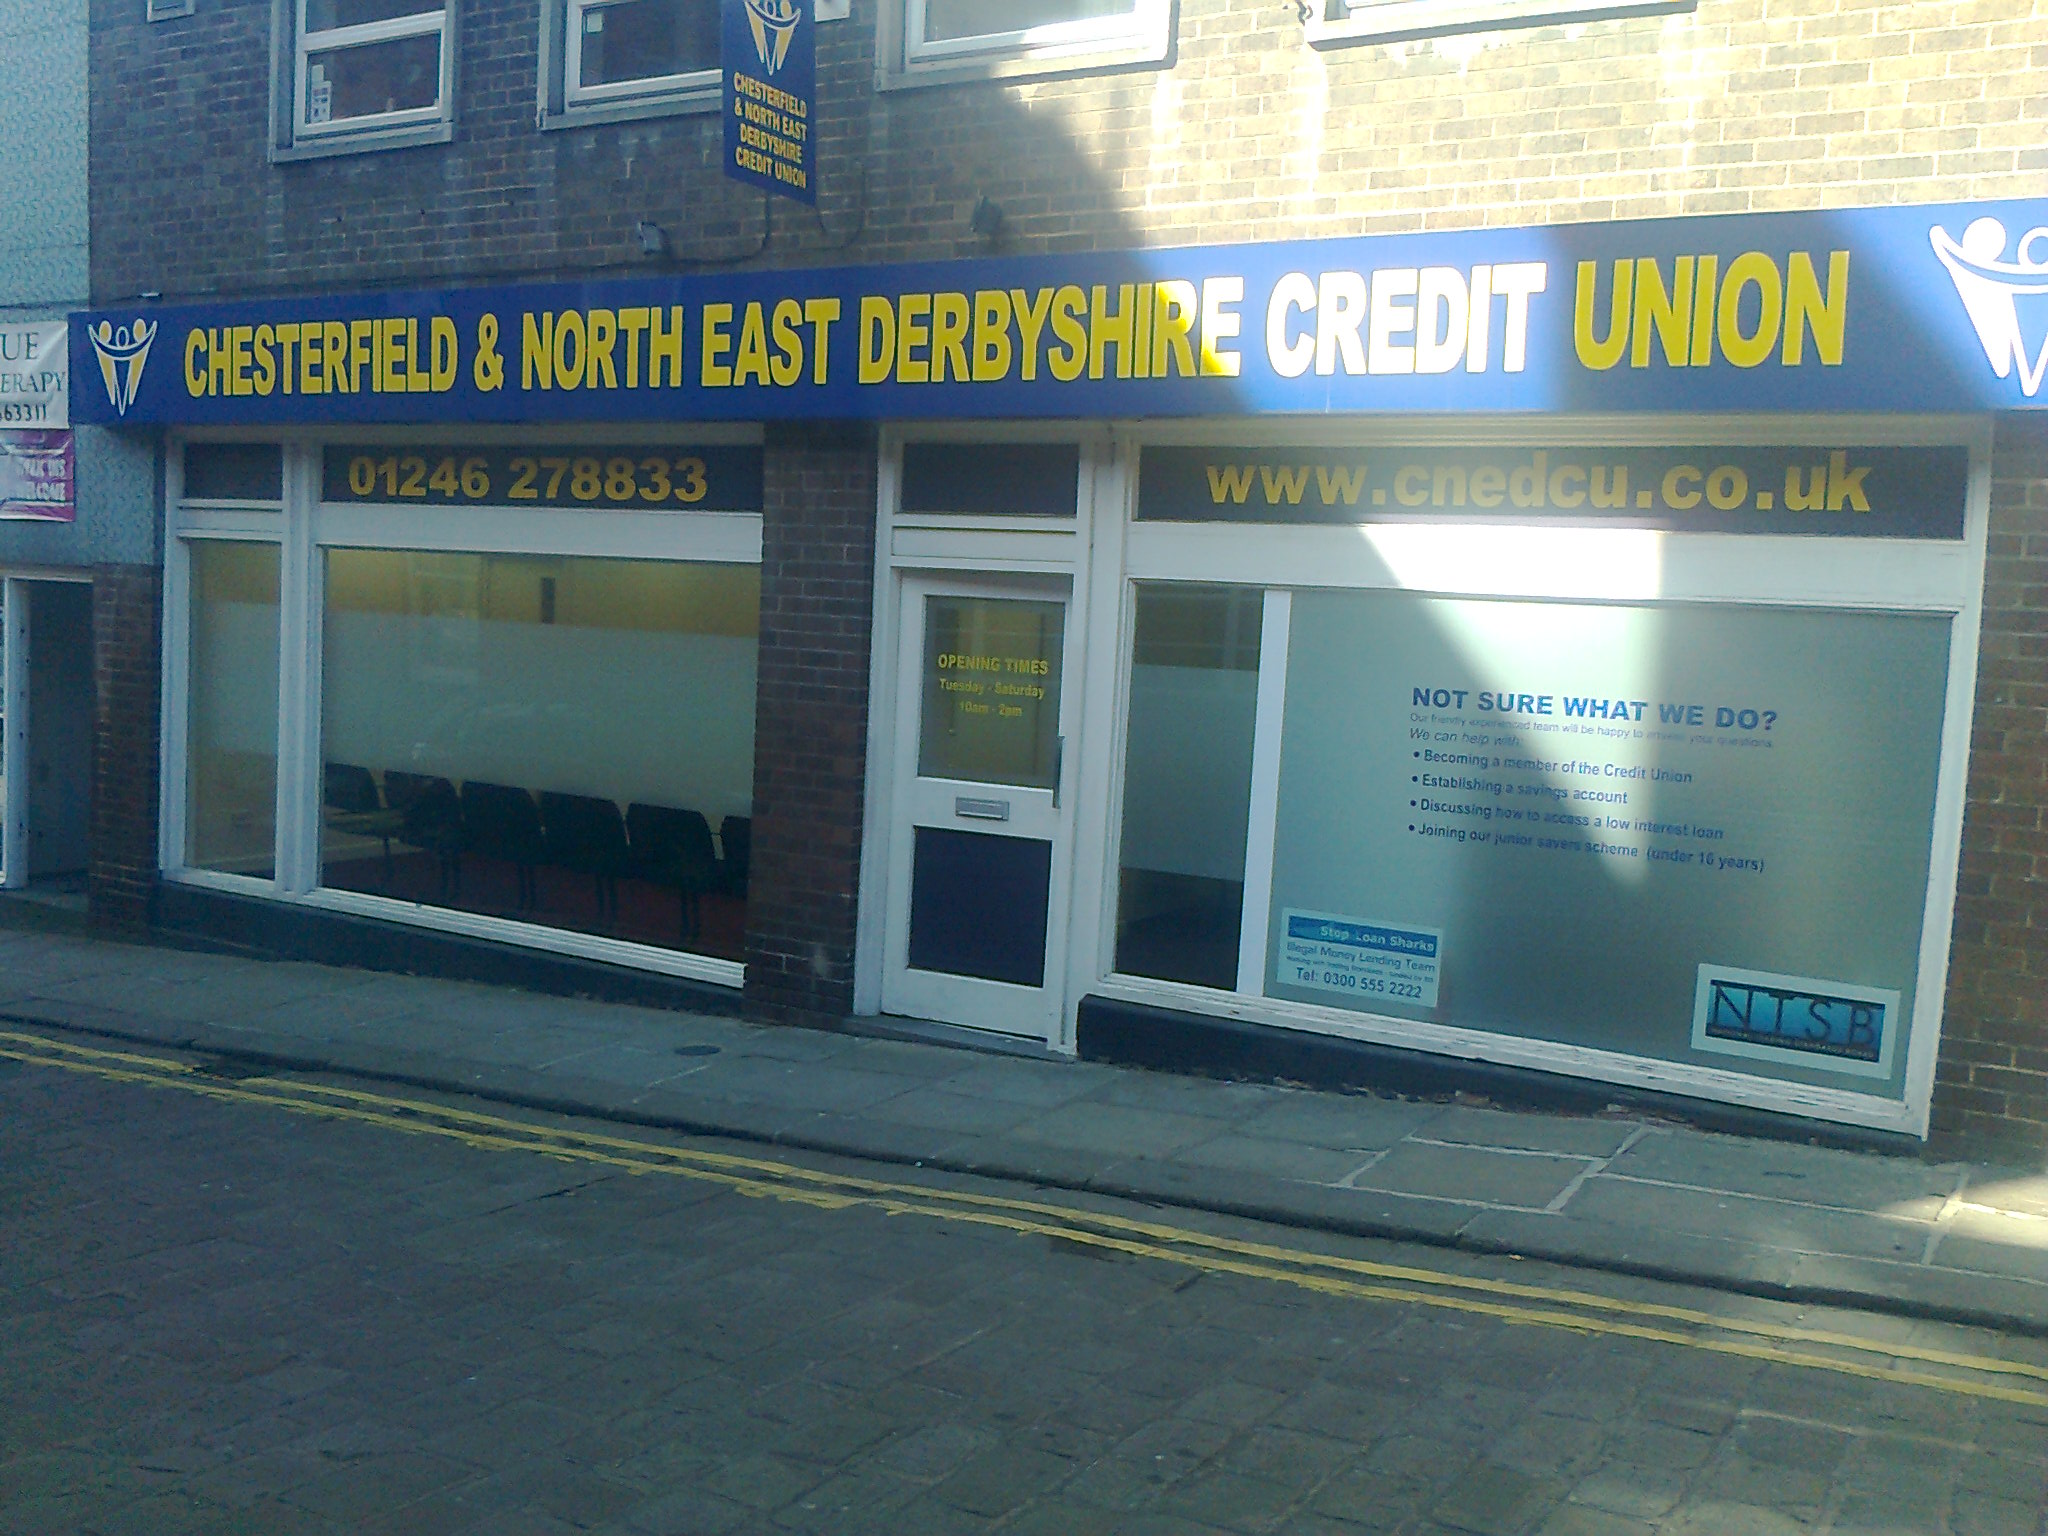 Chesterfield & North East Derbyshire Credit Union 02